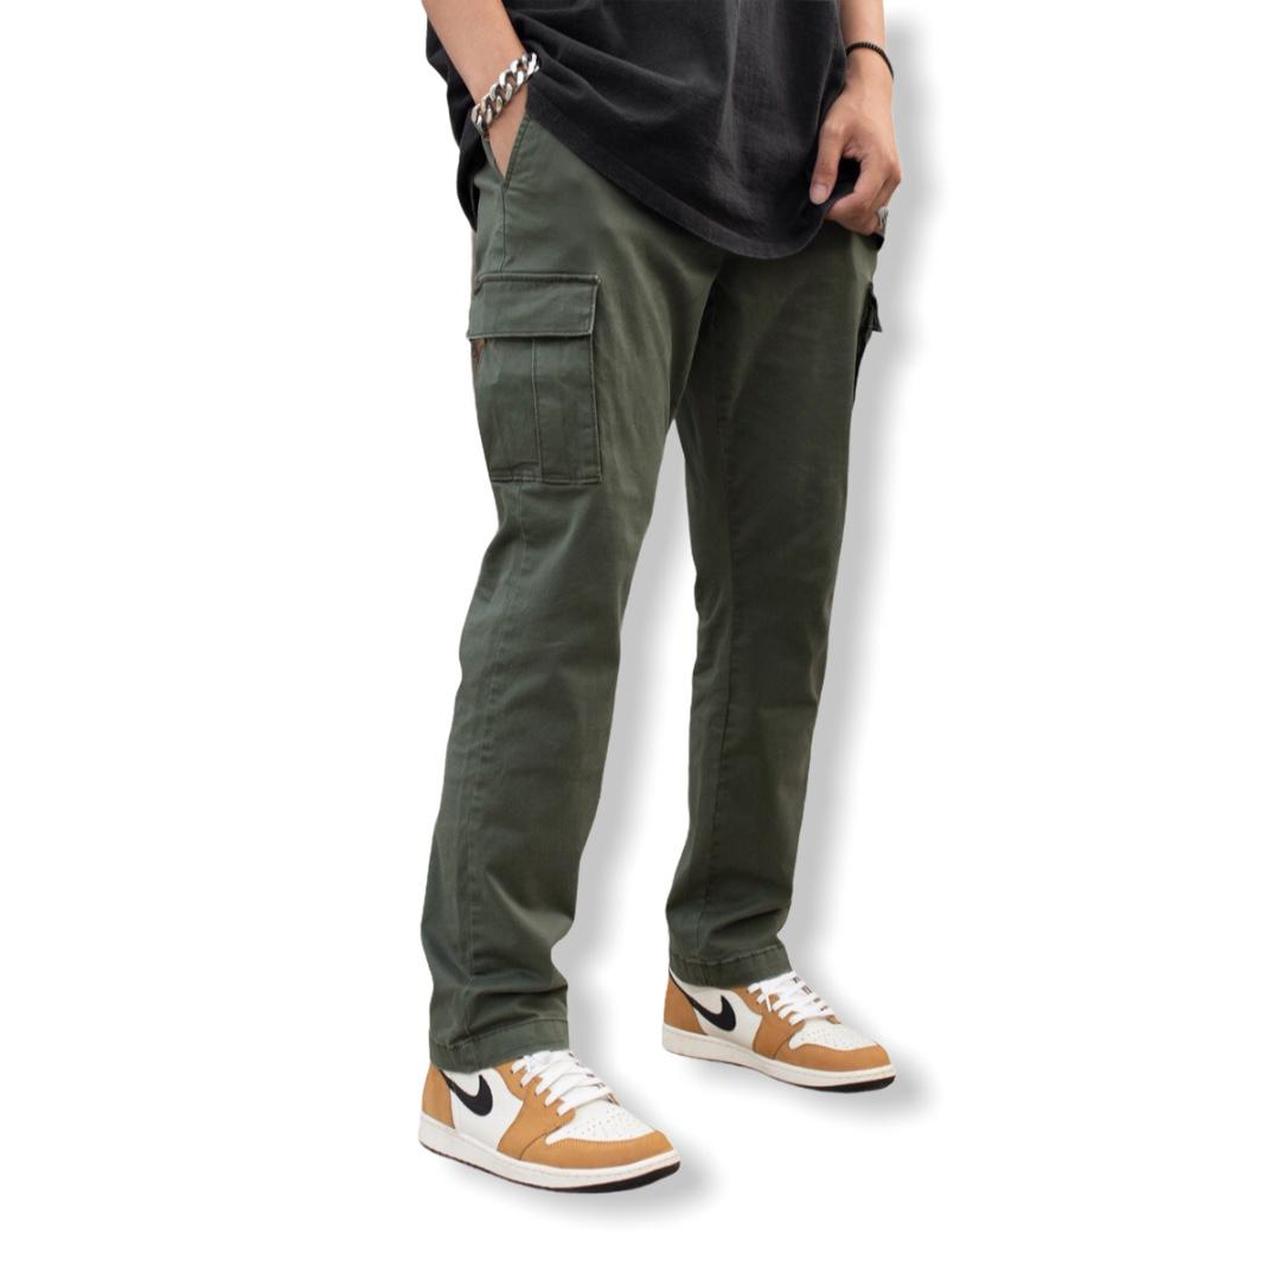 Product Image 2 - Cargo Pants Olive
• Nice fade
•